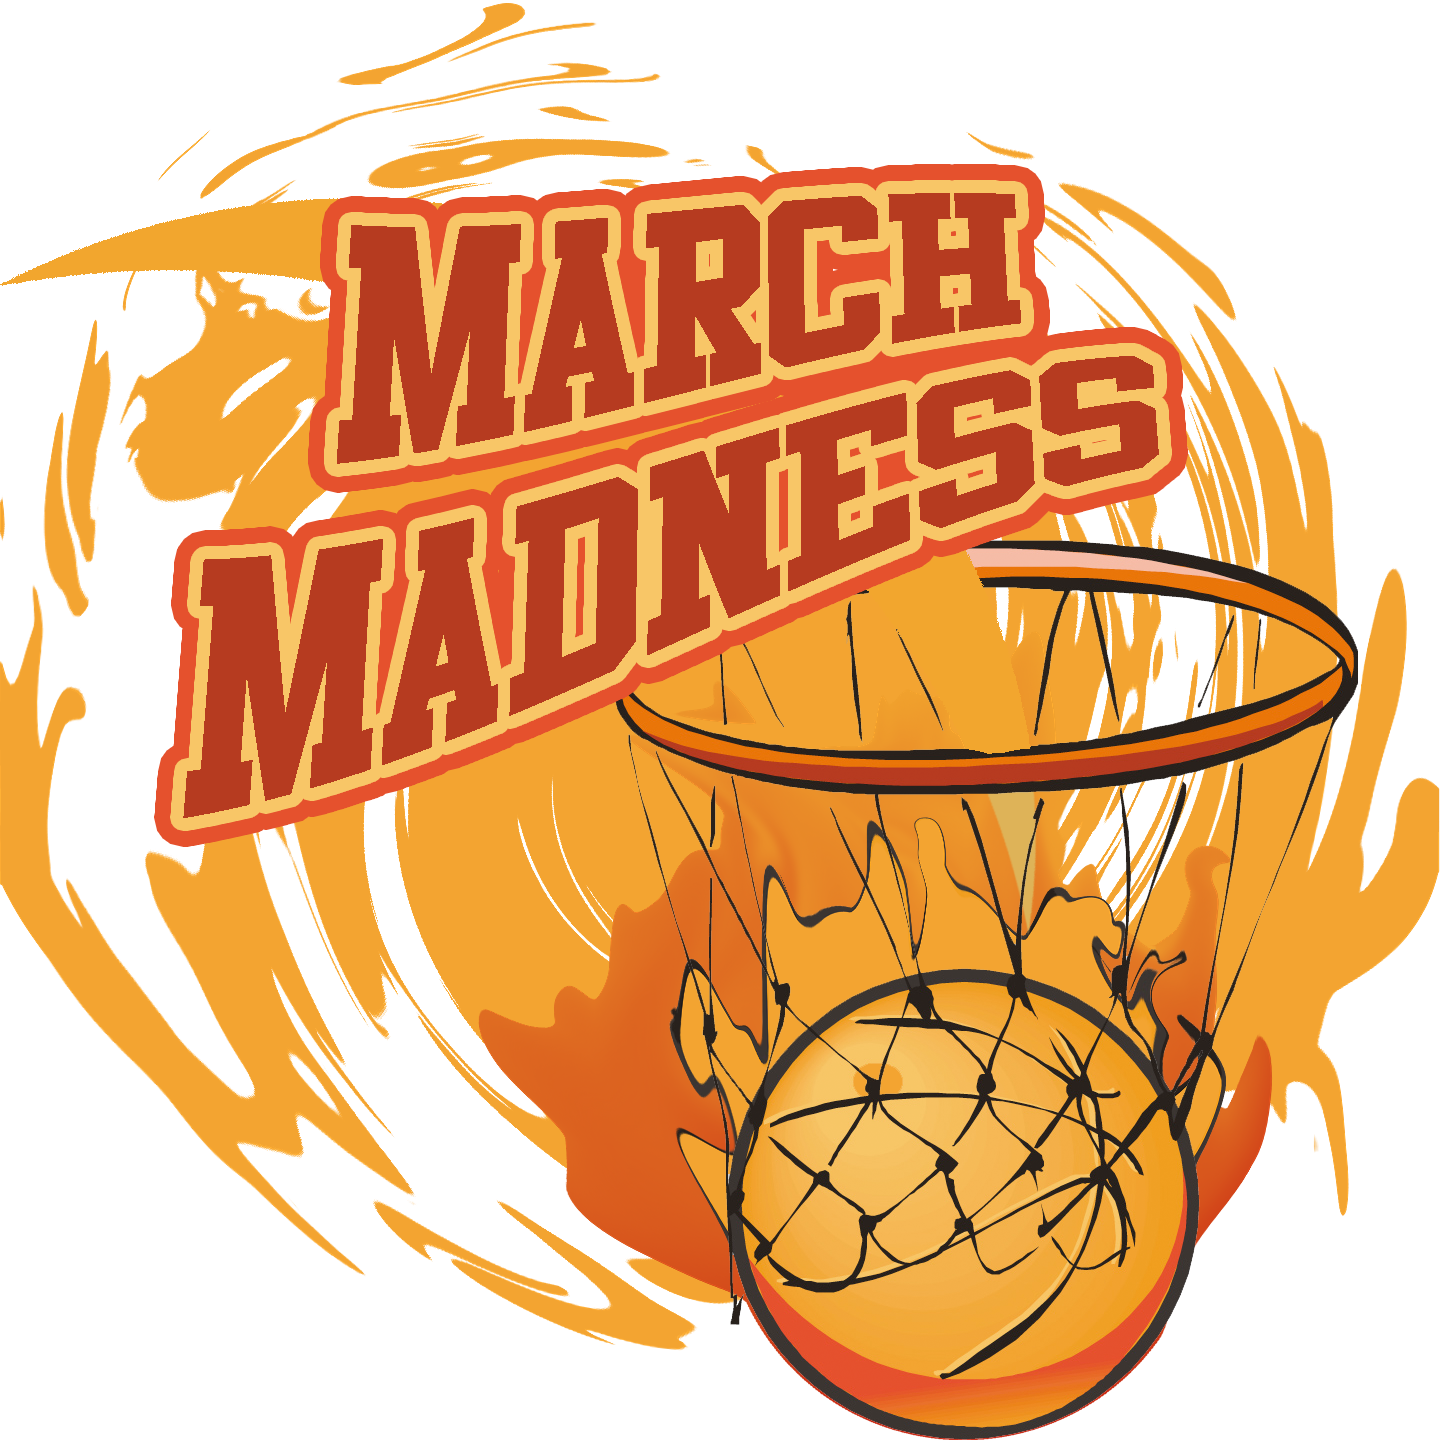 free-download-march-madness-logo-hd-wallpaper-vector-designs-wallpapers